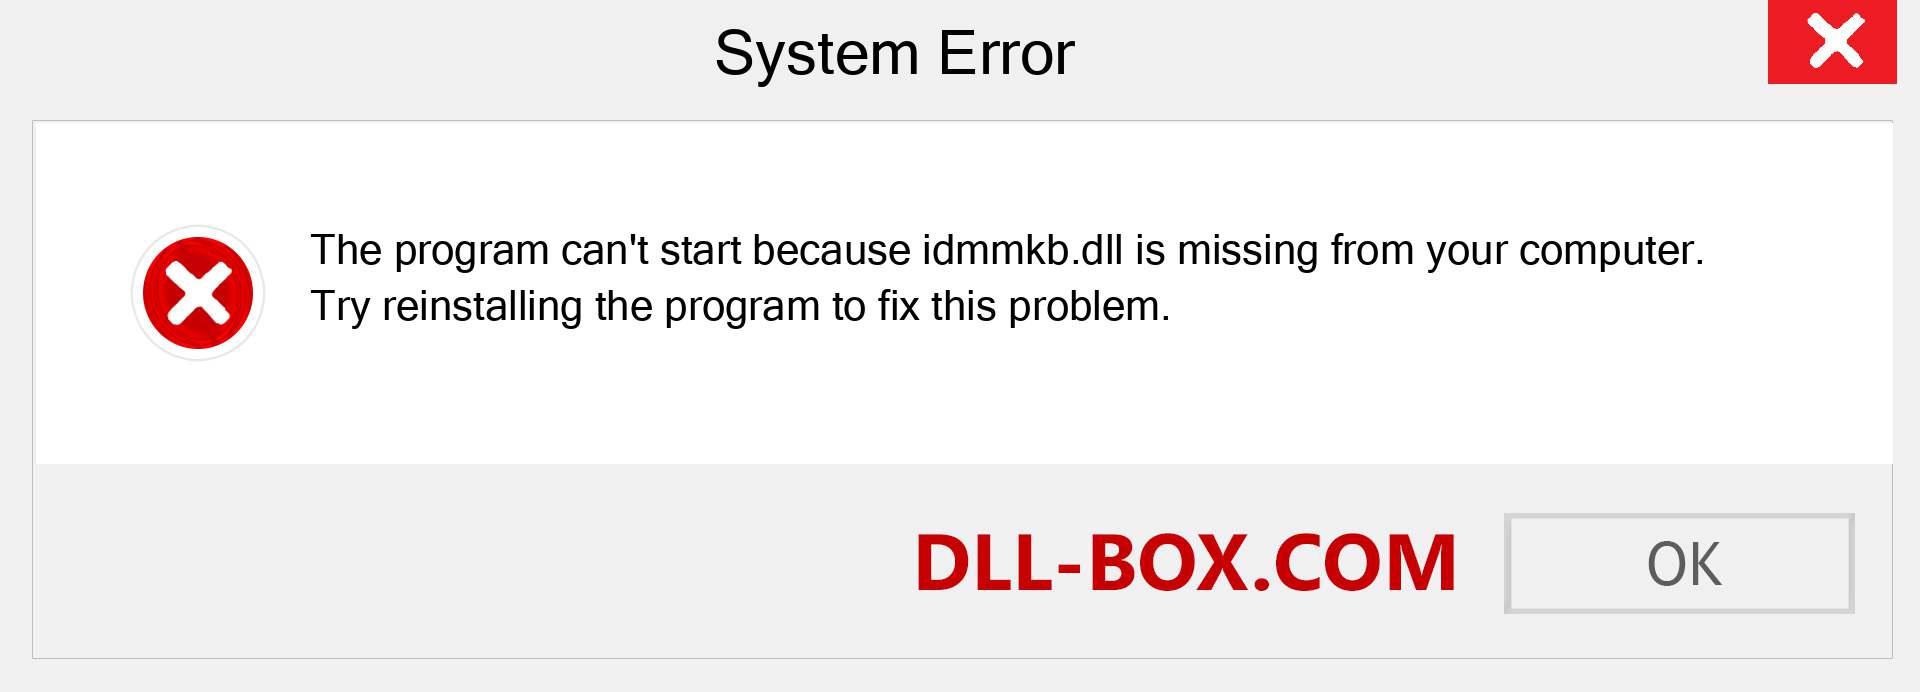  idmmkb.dll file is missing?. Download for Windows 7, 8, 10 - Fix  idmmkb dll Missing Error on Windows, photos, images